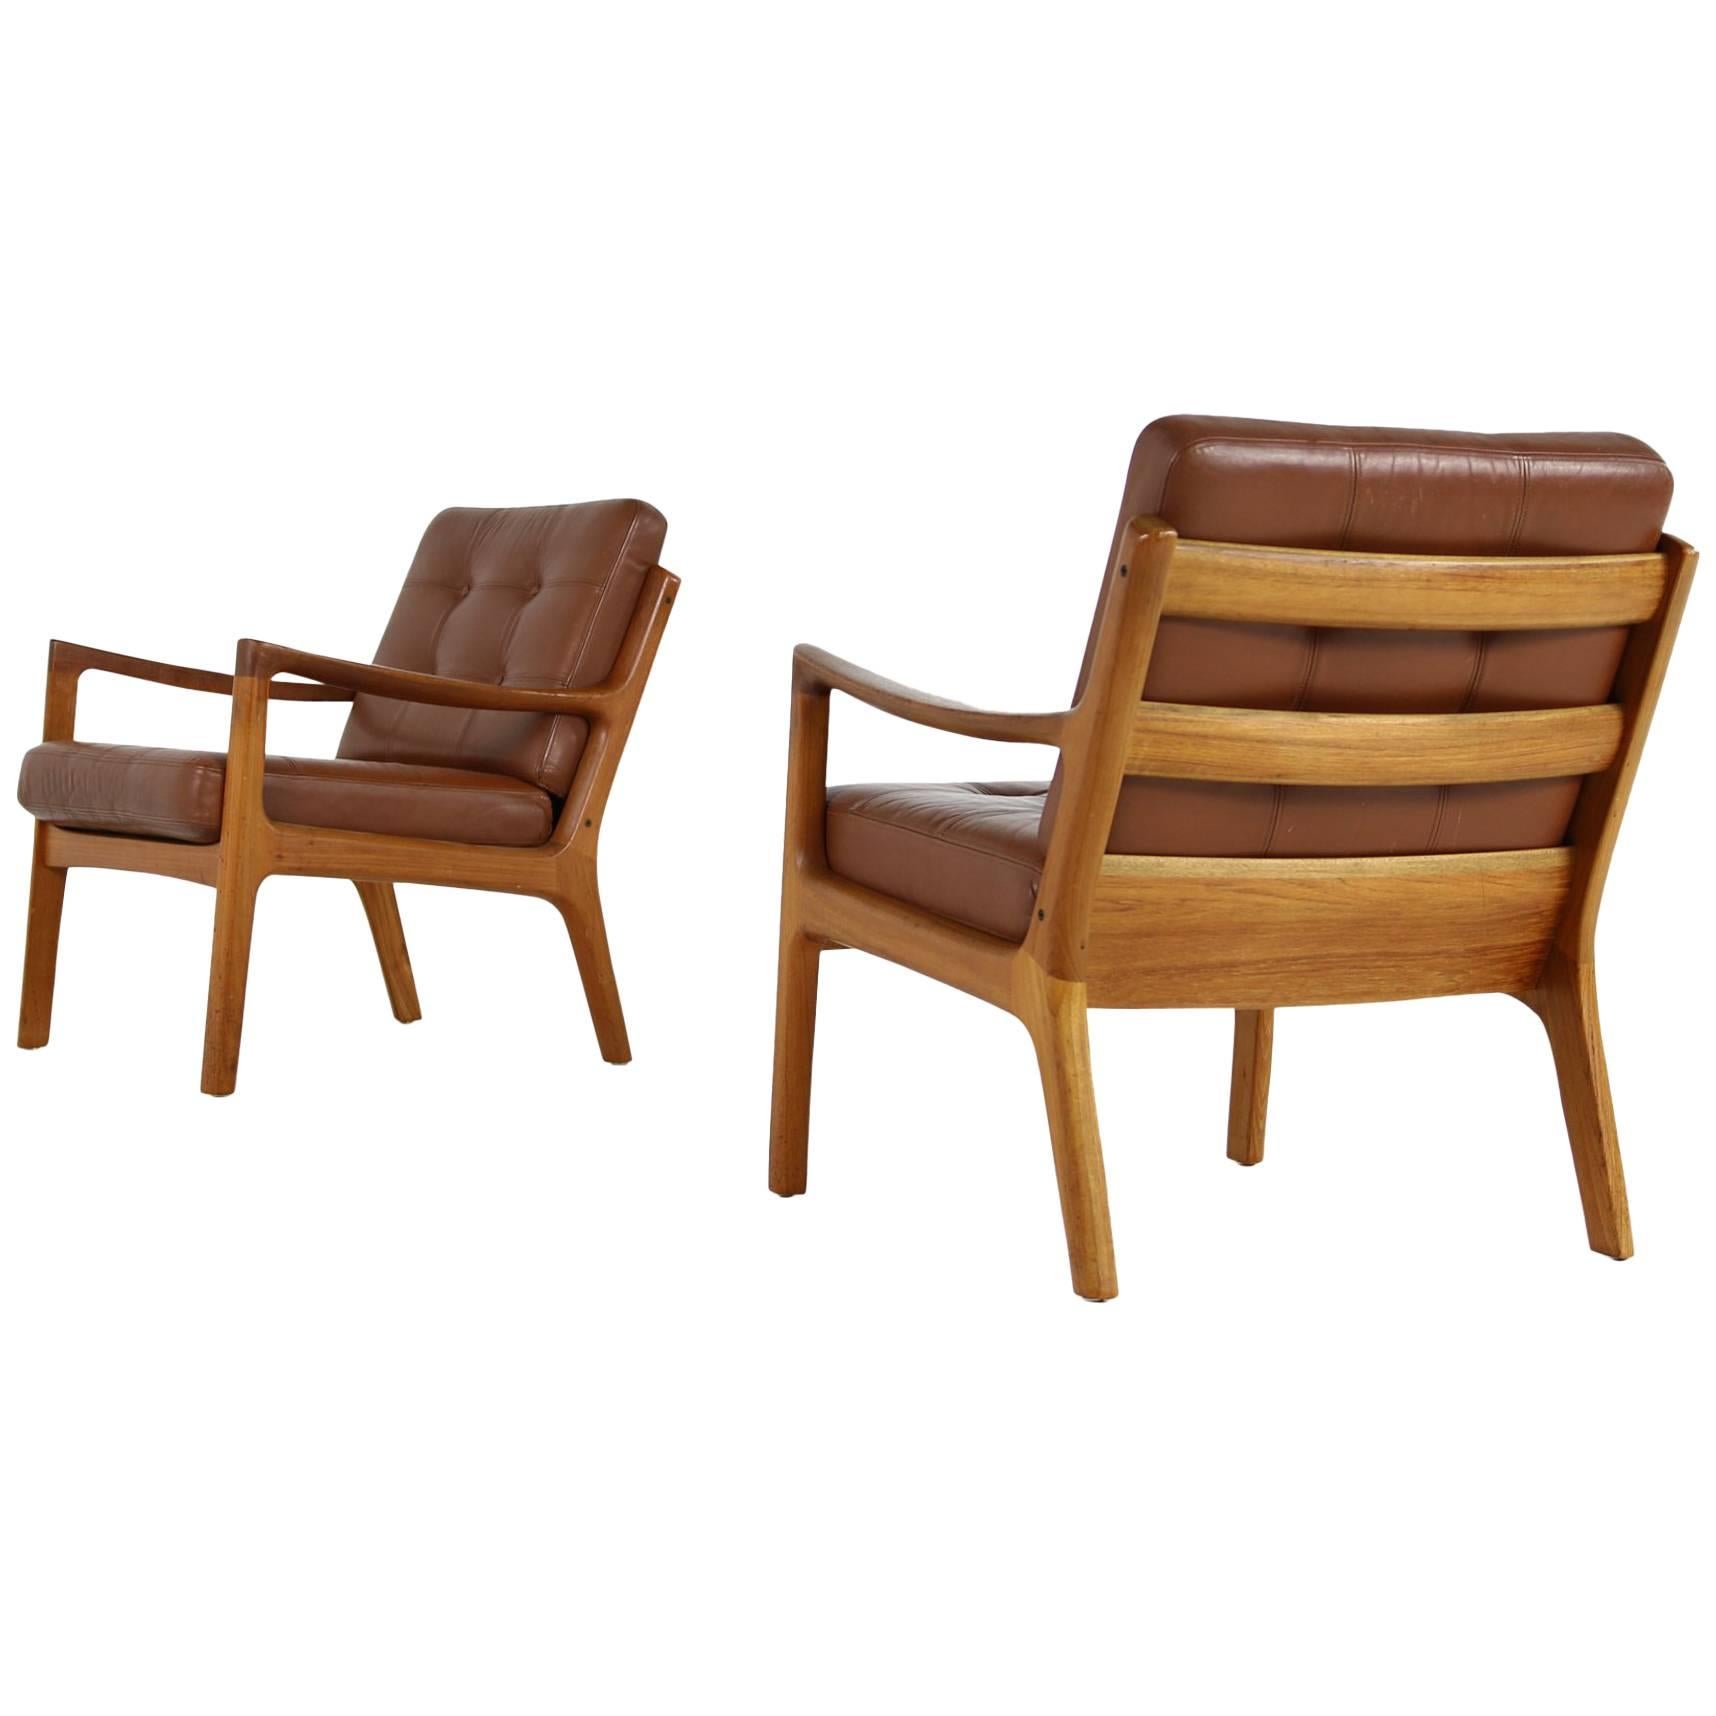 Pair of Danish 1960s Teak and Brown Leather Lounge Easy Chairs by Ole Wanscher